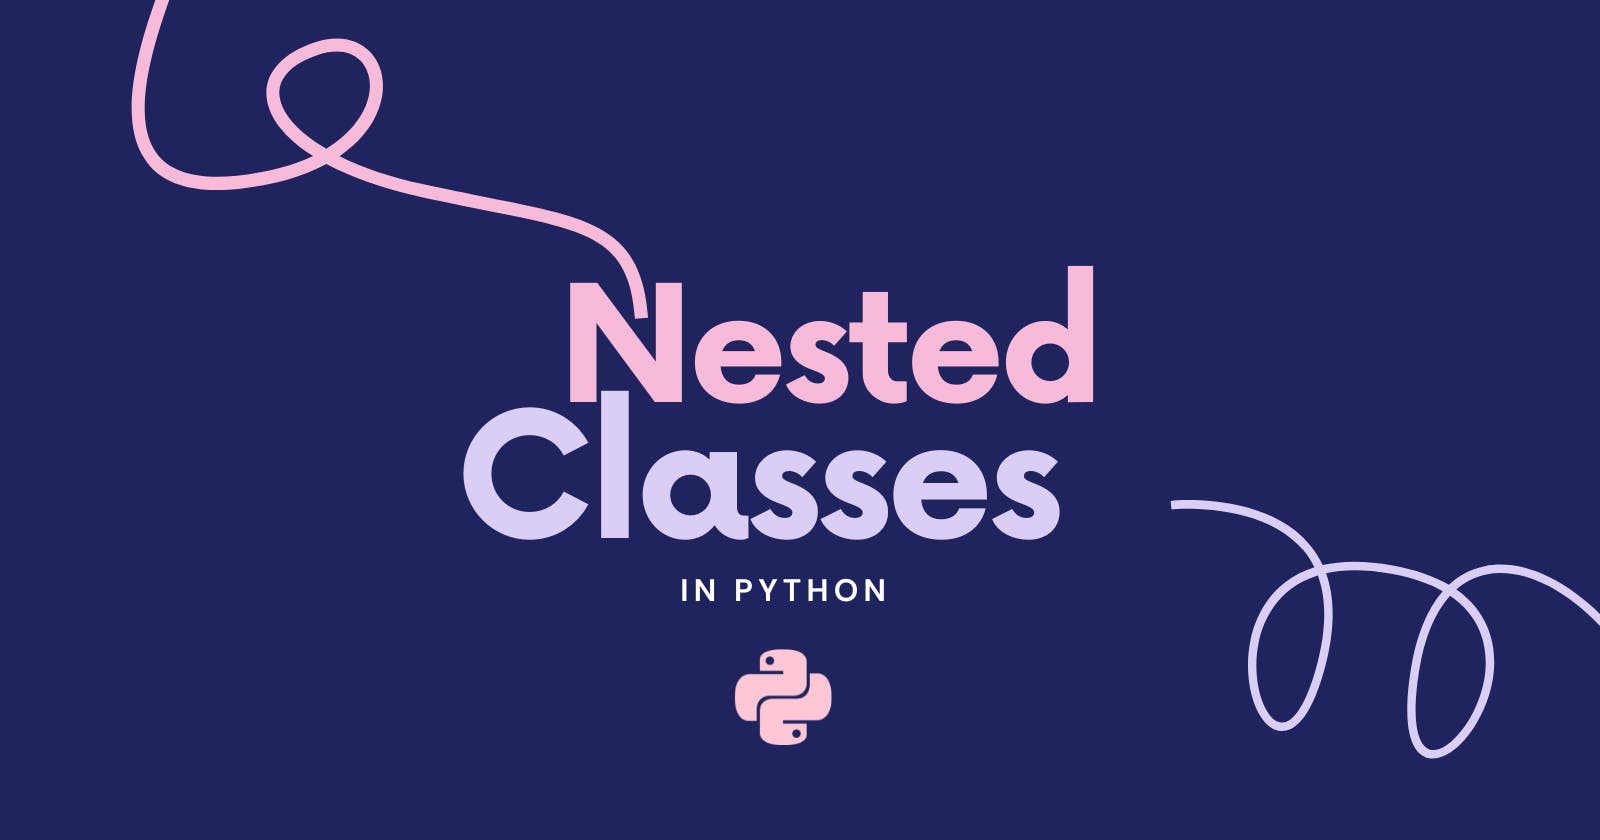 Exploring Nested Classes in Python